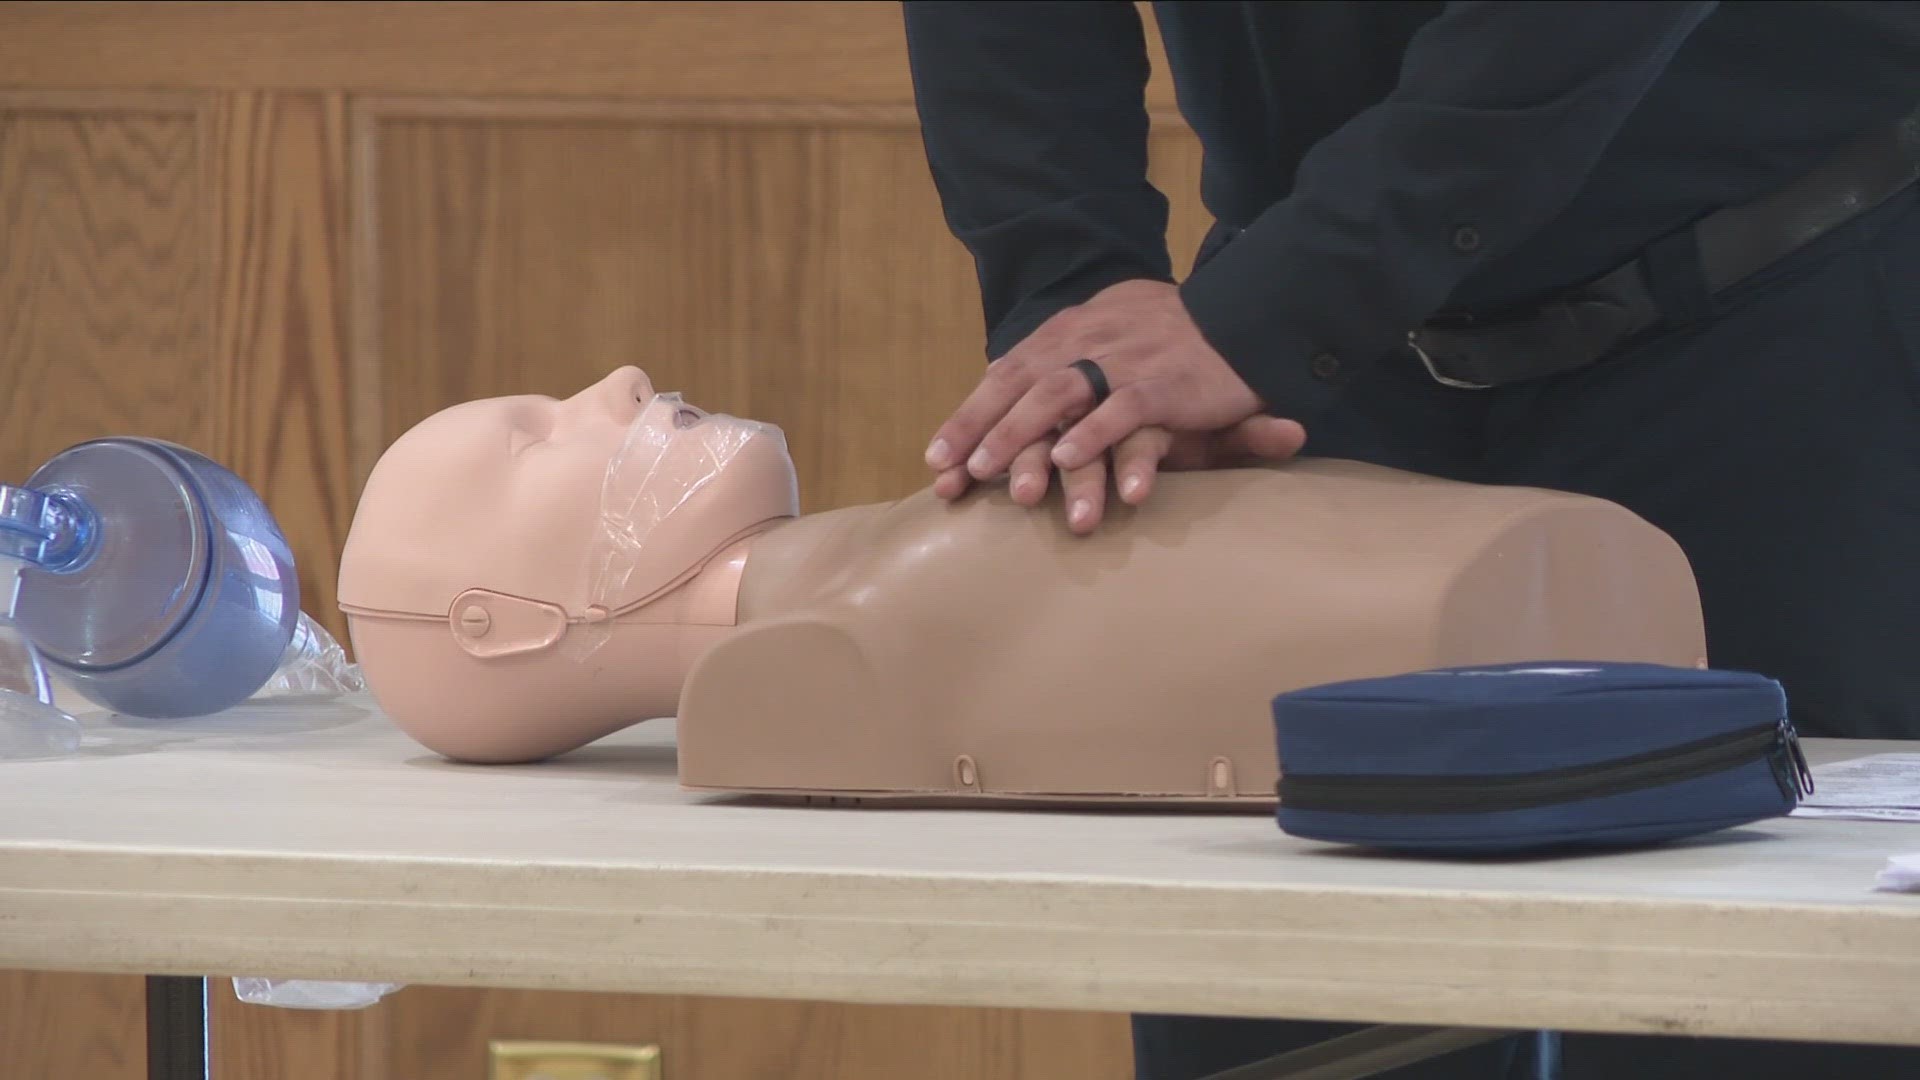 Assemblyman Bill Conrad has announced a $25,000 grant that he secured that helps pay for a free CPR training program for the community.